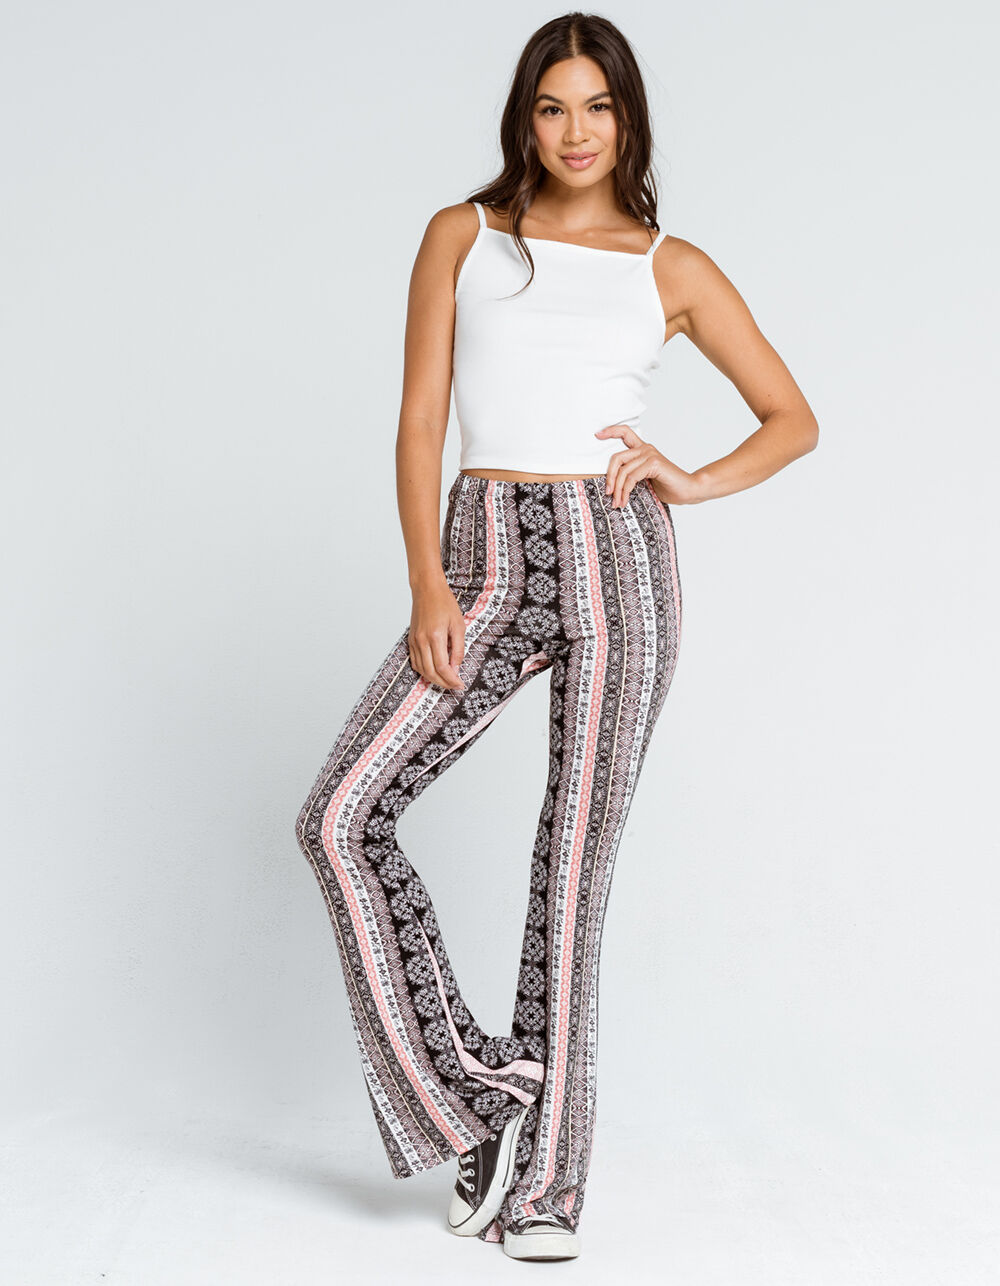 SKY AND SPARROW Spring Womens Flare Pants - BLACK/PINK | Tillys